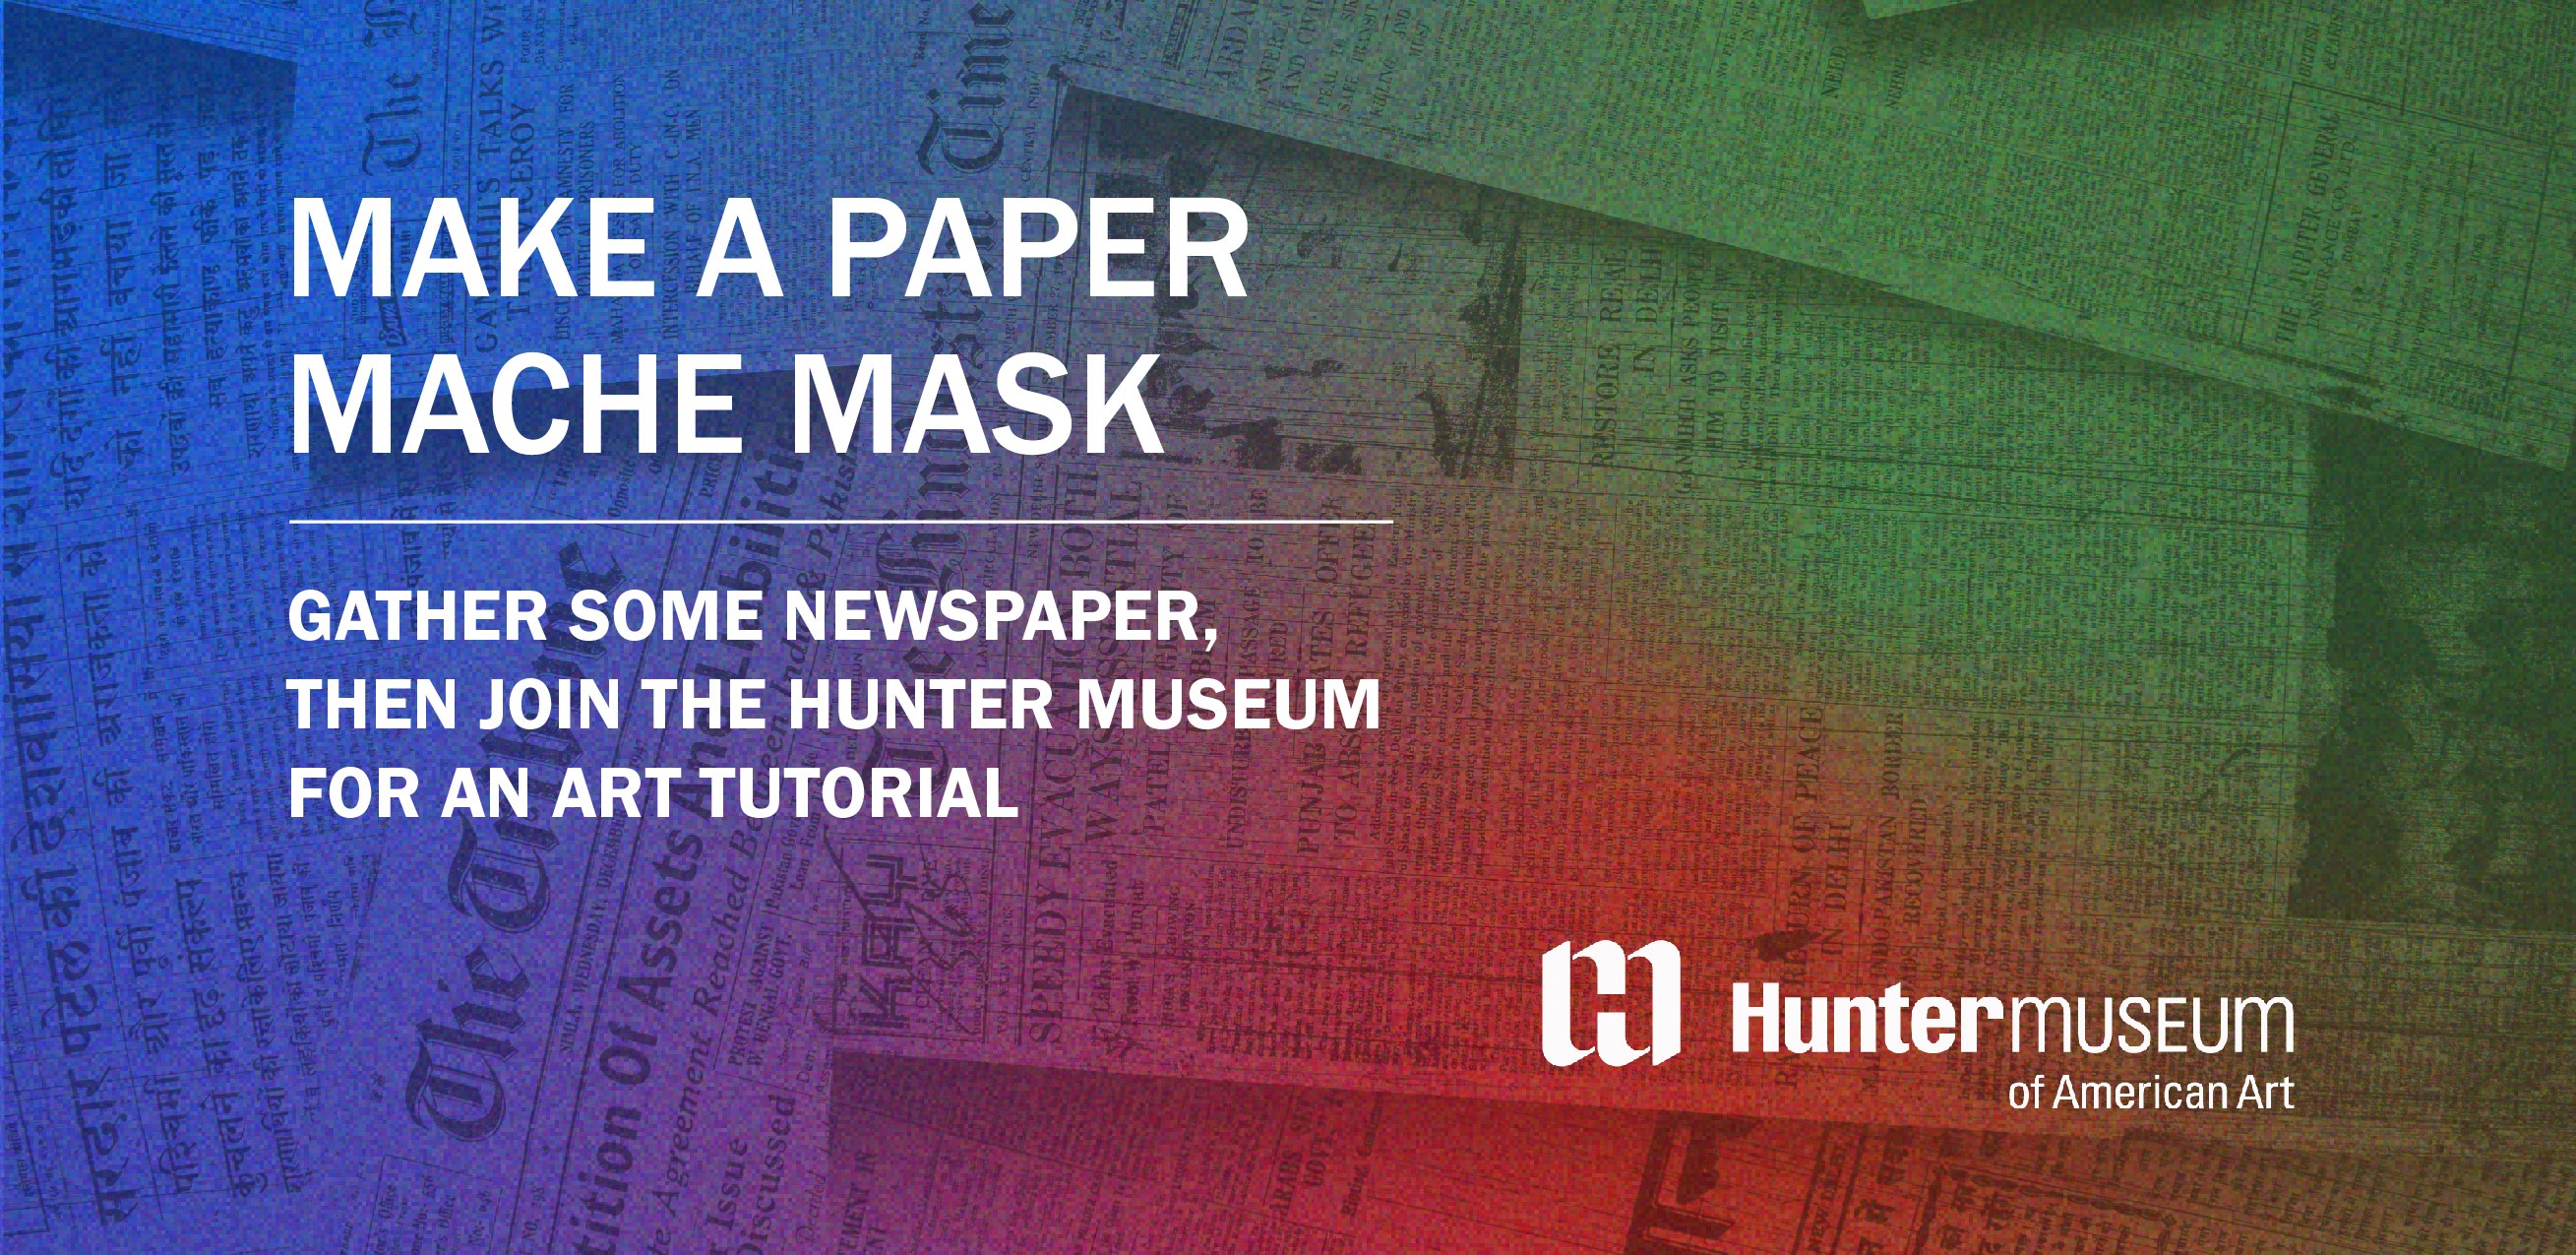 Text reads, "Make a paper mache mask. Gather some newspaper, then join the Hunter Museum for an art tutorial."